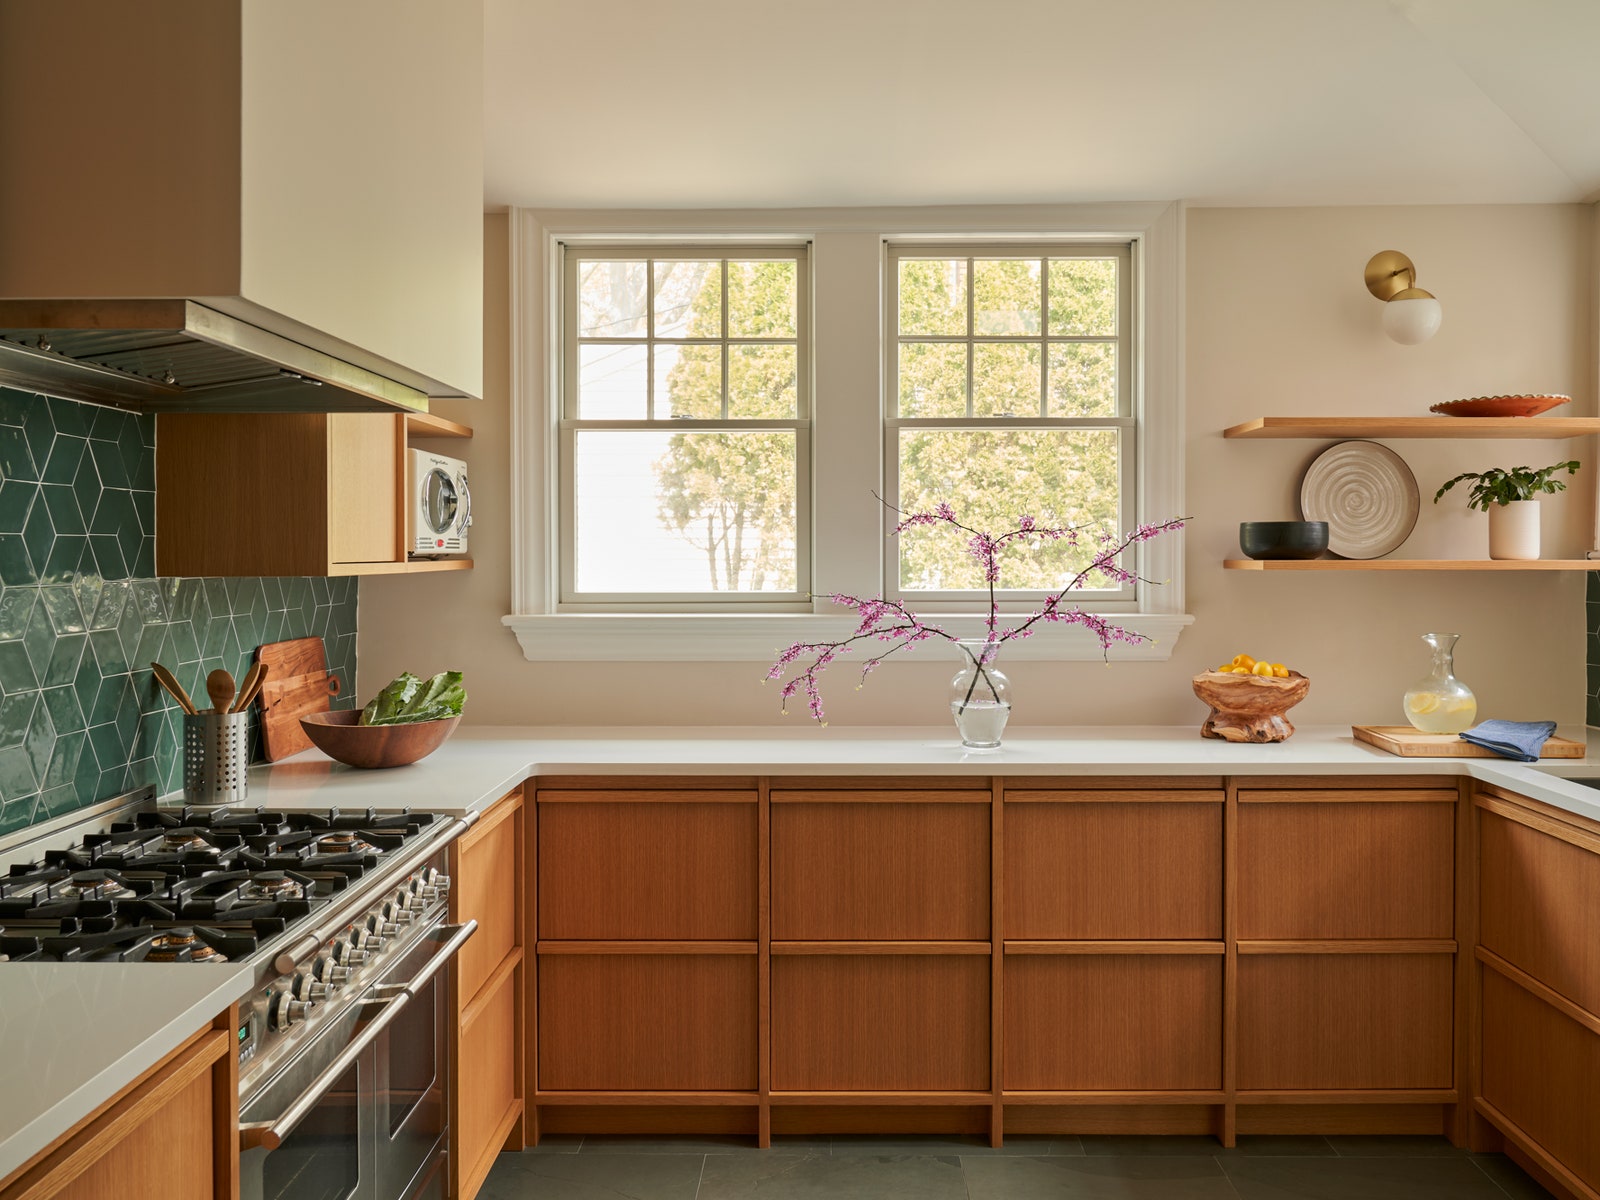 A 100-Year-Old Long Island Home Got a Bright Kitchen Glow-Up